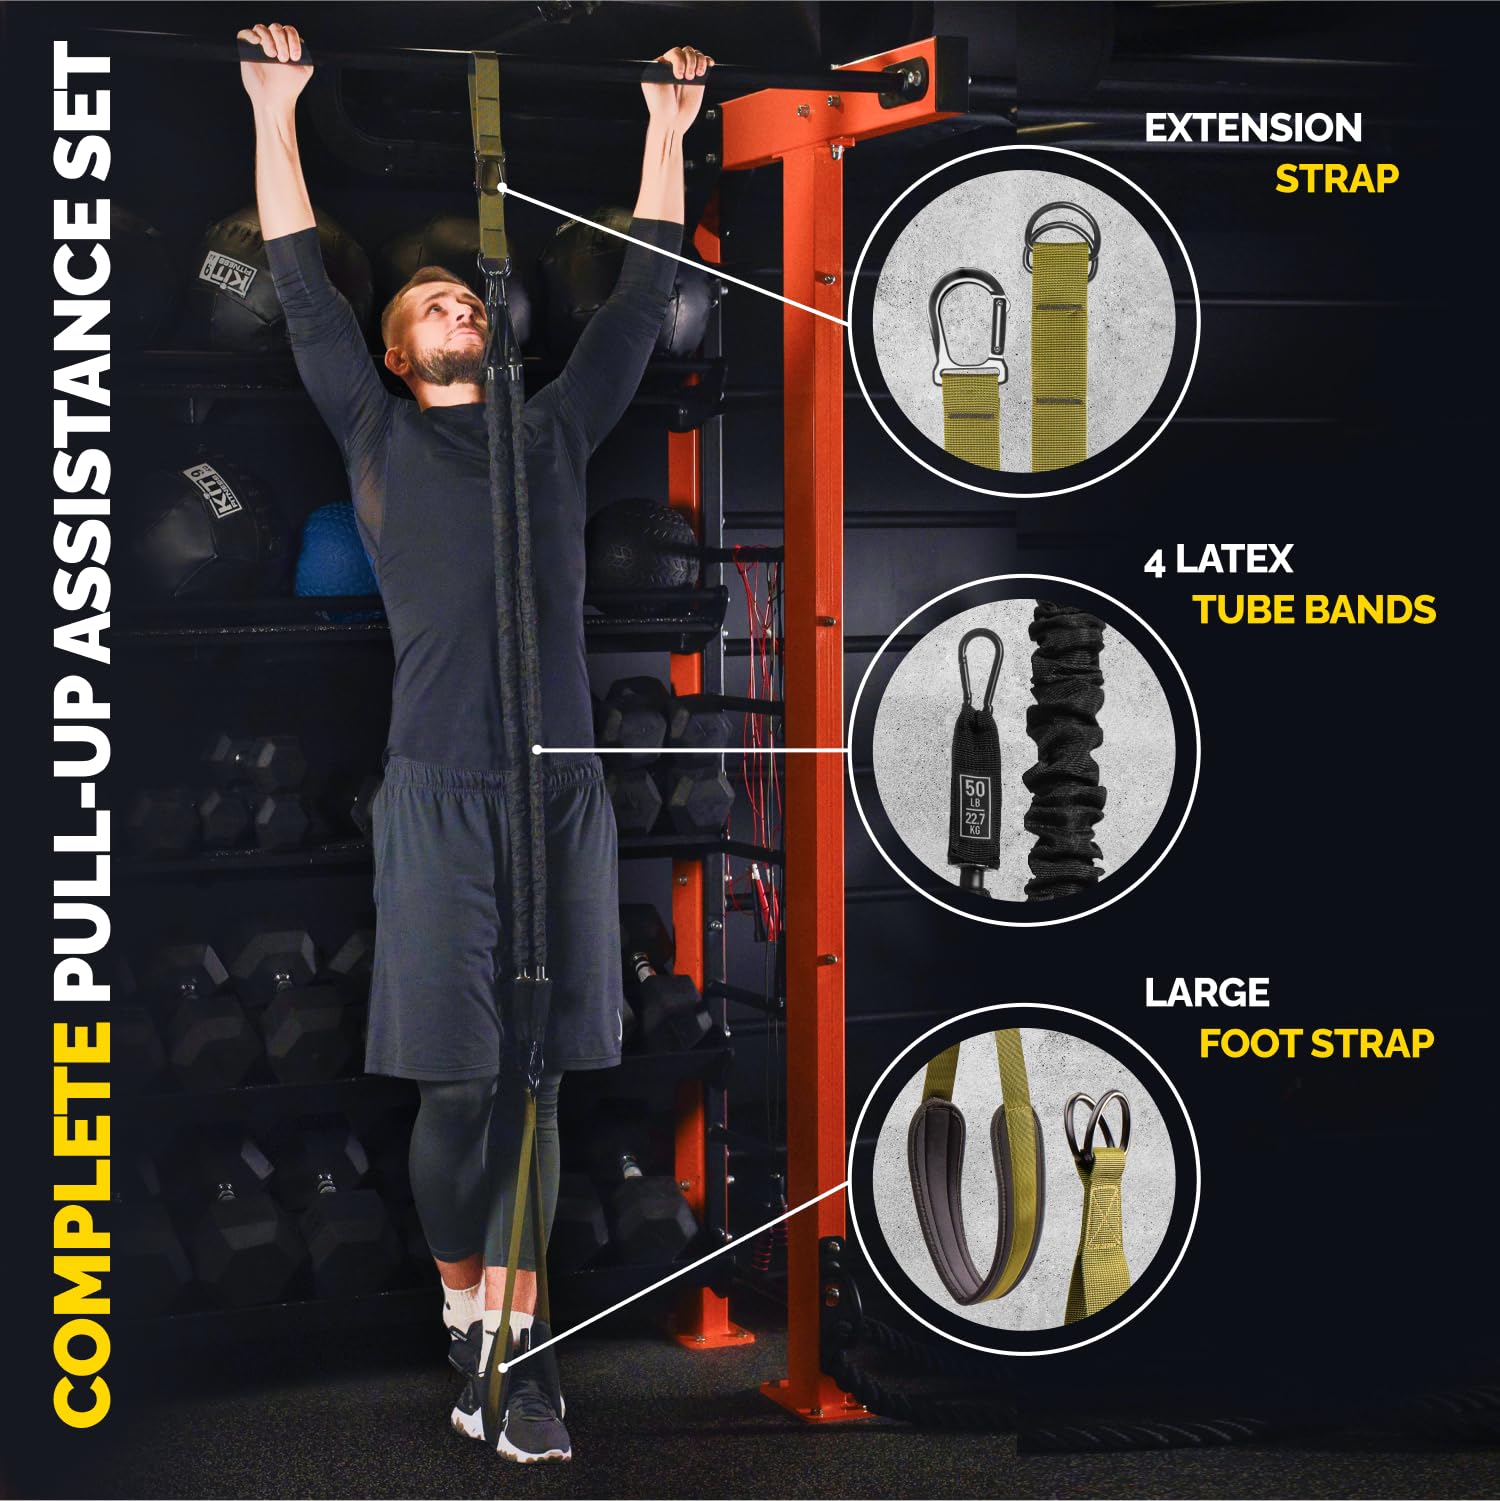 Pull Up Assistance Bands Set - 4 Heavy-Duty Pull Up Bands, Height Adjustable Strap & Comfortable Foot Strap - Stackable Pull Up Resistance Bands for Pull Ups - Pull Up Assist Bands (Military Green)